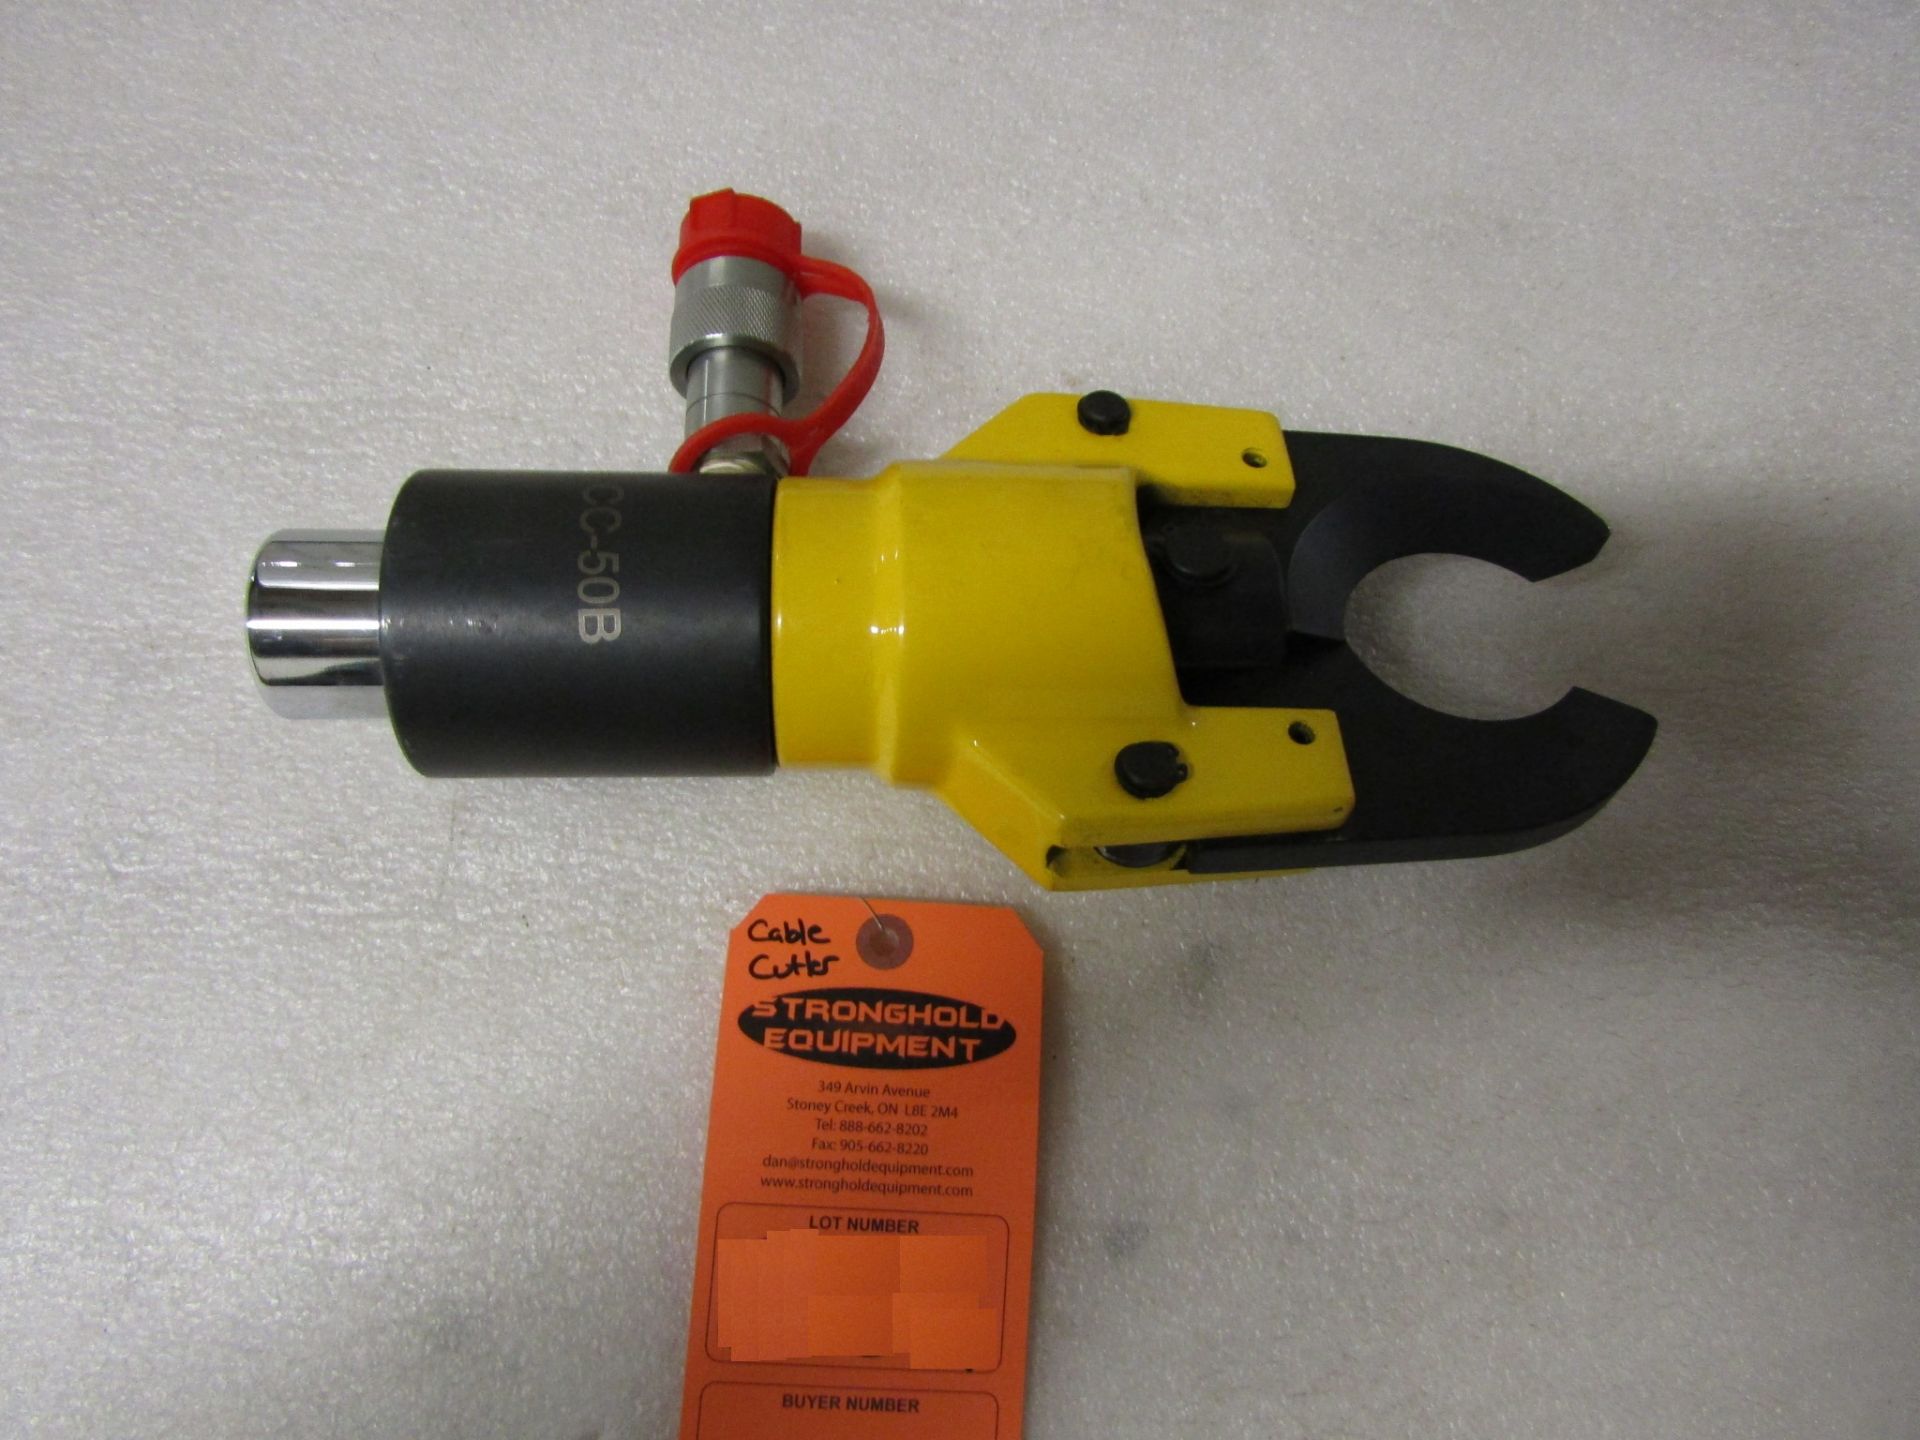 CC-50B Hydraulic Cable / Wire Cutter style - Mint and Unused in case